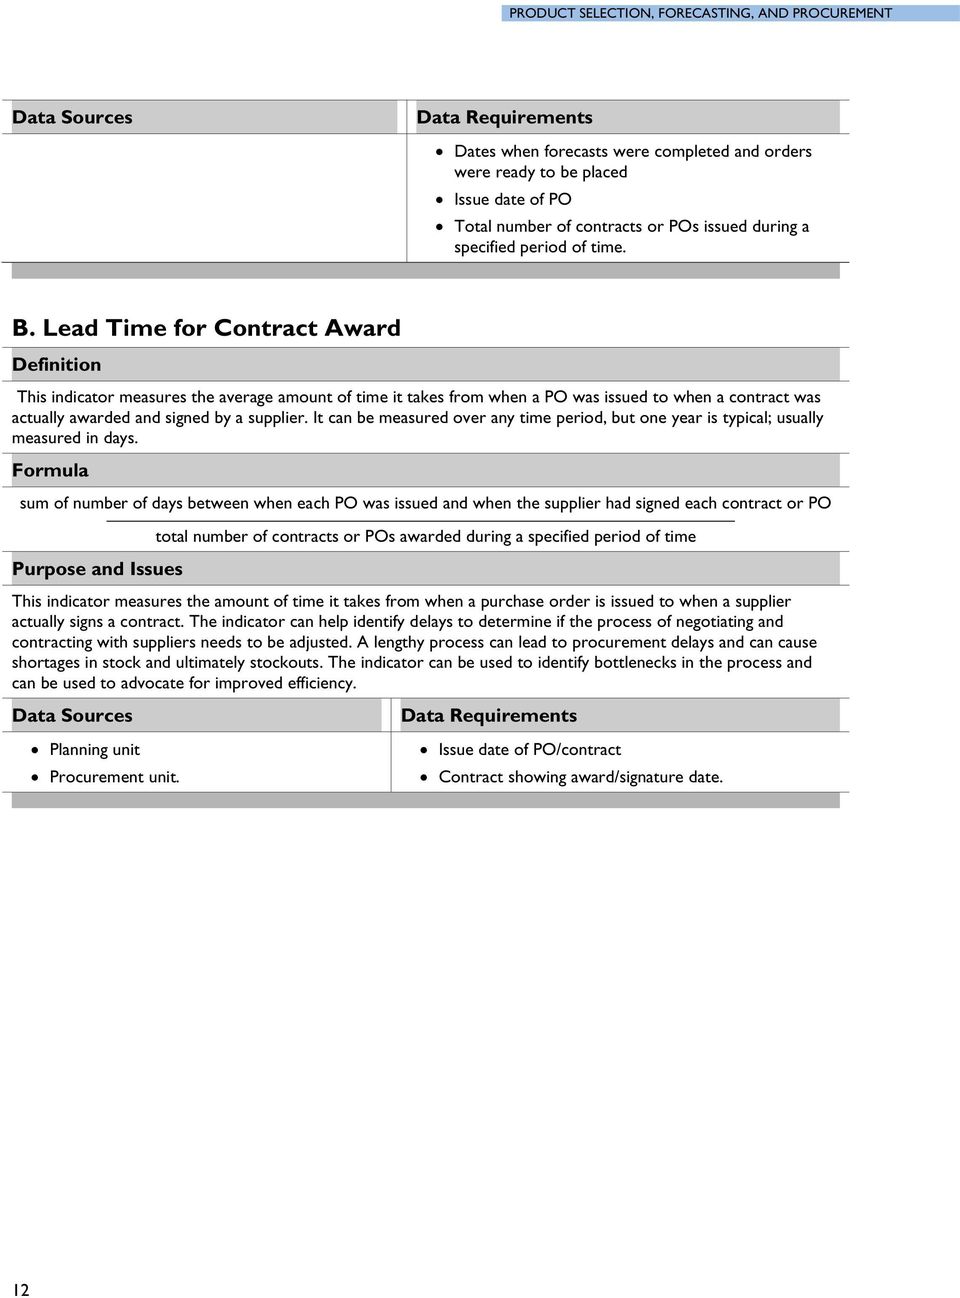 Lead Time for Contract Award This indicator measures the average amount of time it takes from when a PO was issued to when a contract was actually awarded and signed by a supplier.